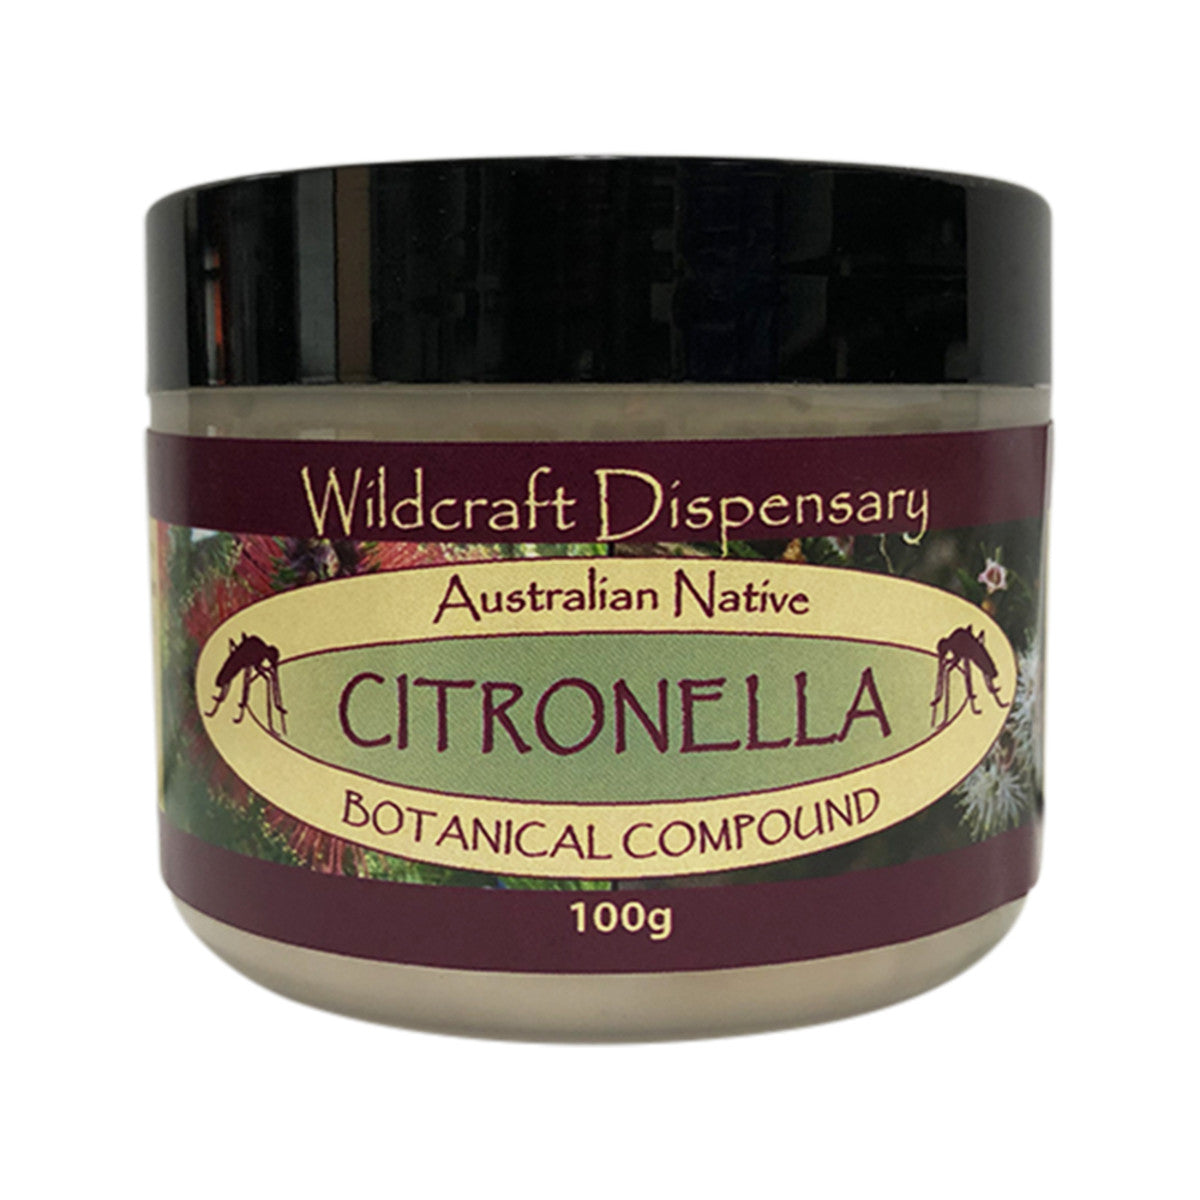 Wildcraft Dispensary Citronella Natural Ointment 100g